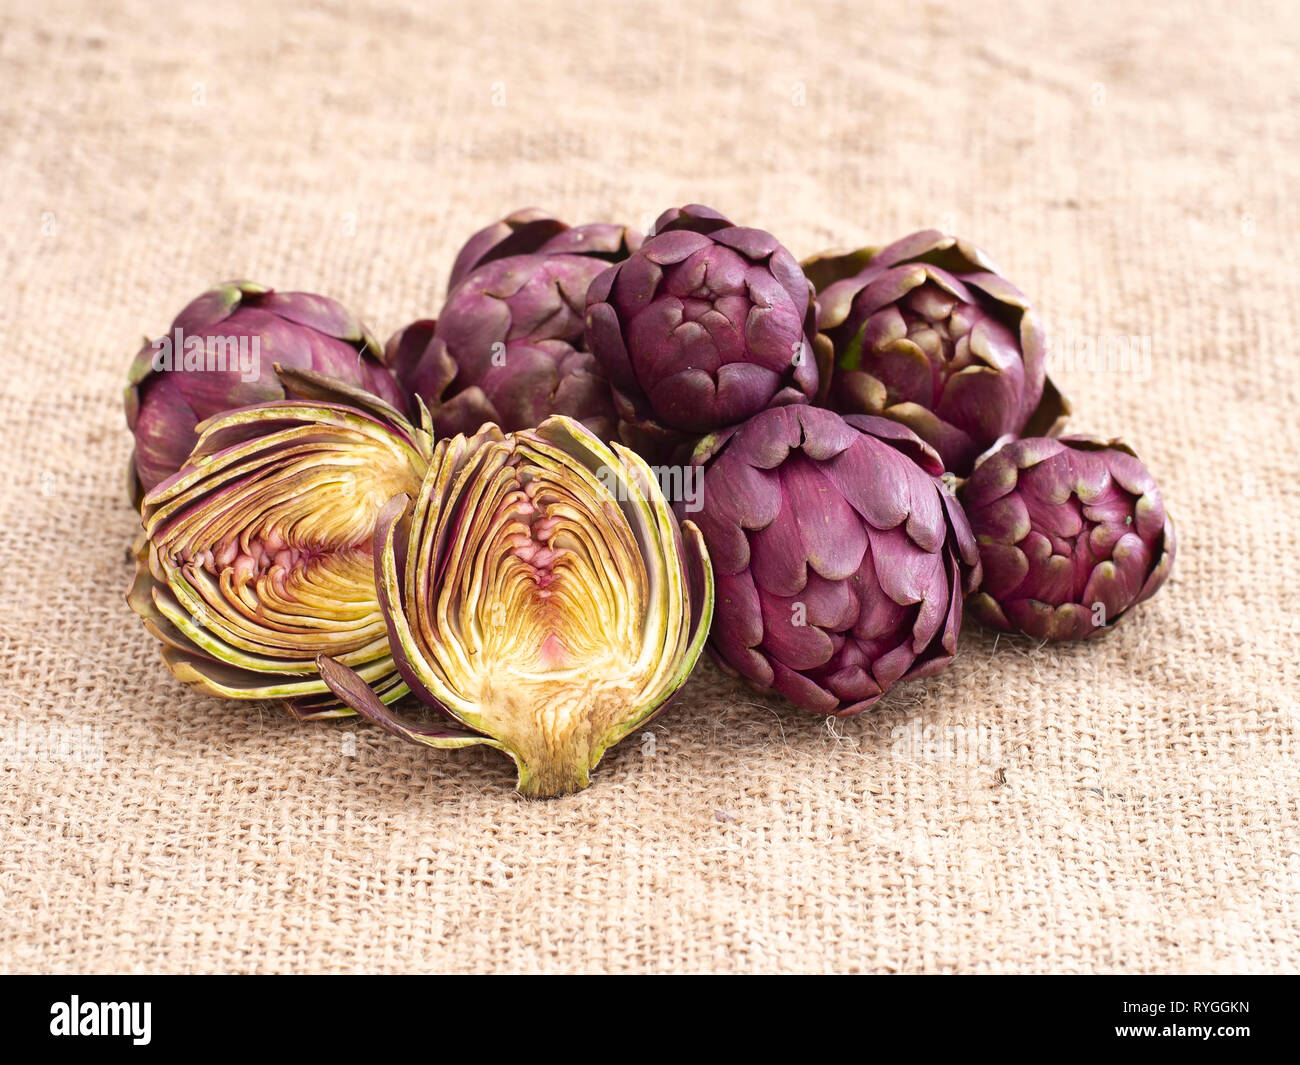 Raw artichokes, Mediterranean vegetable, uncooked on rustic hessian. One cut open to see inside. Stock Photo